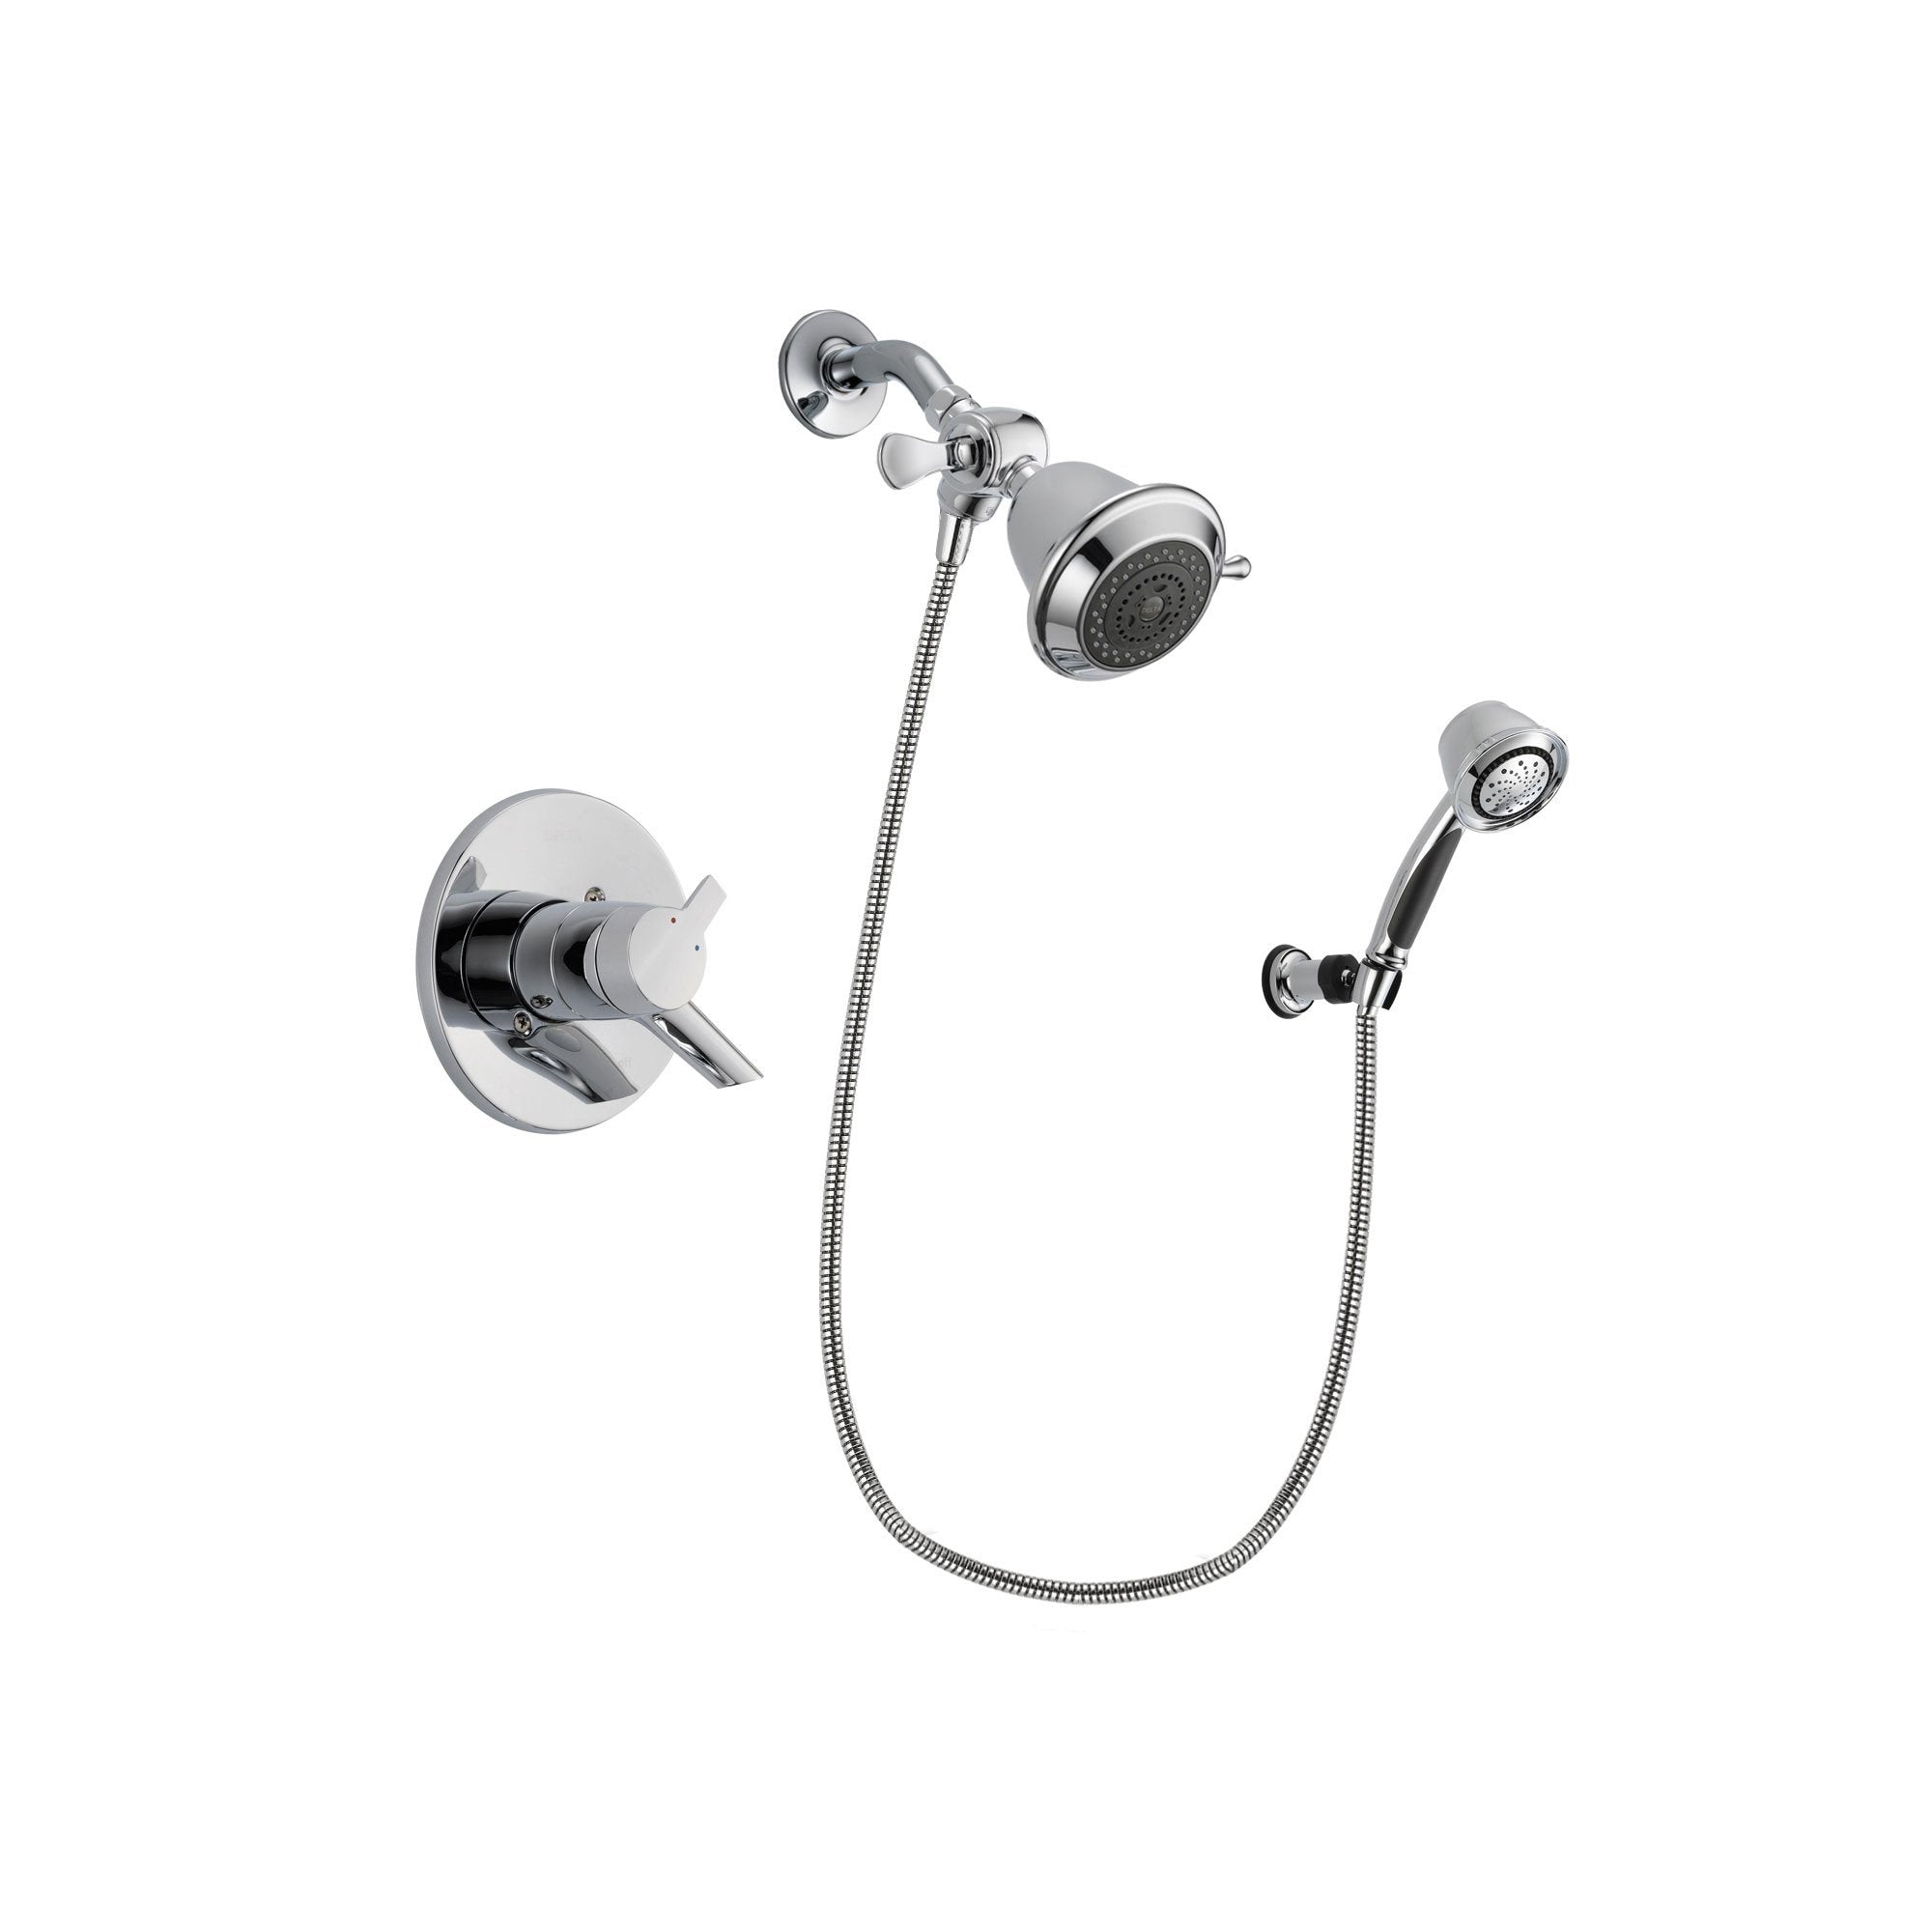 Delta Compel Chrome Shower Faucet System w/ Shower Head and Hand Shower DSP0314V